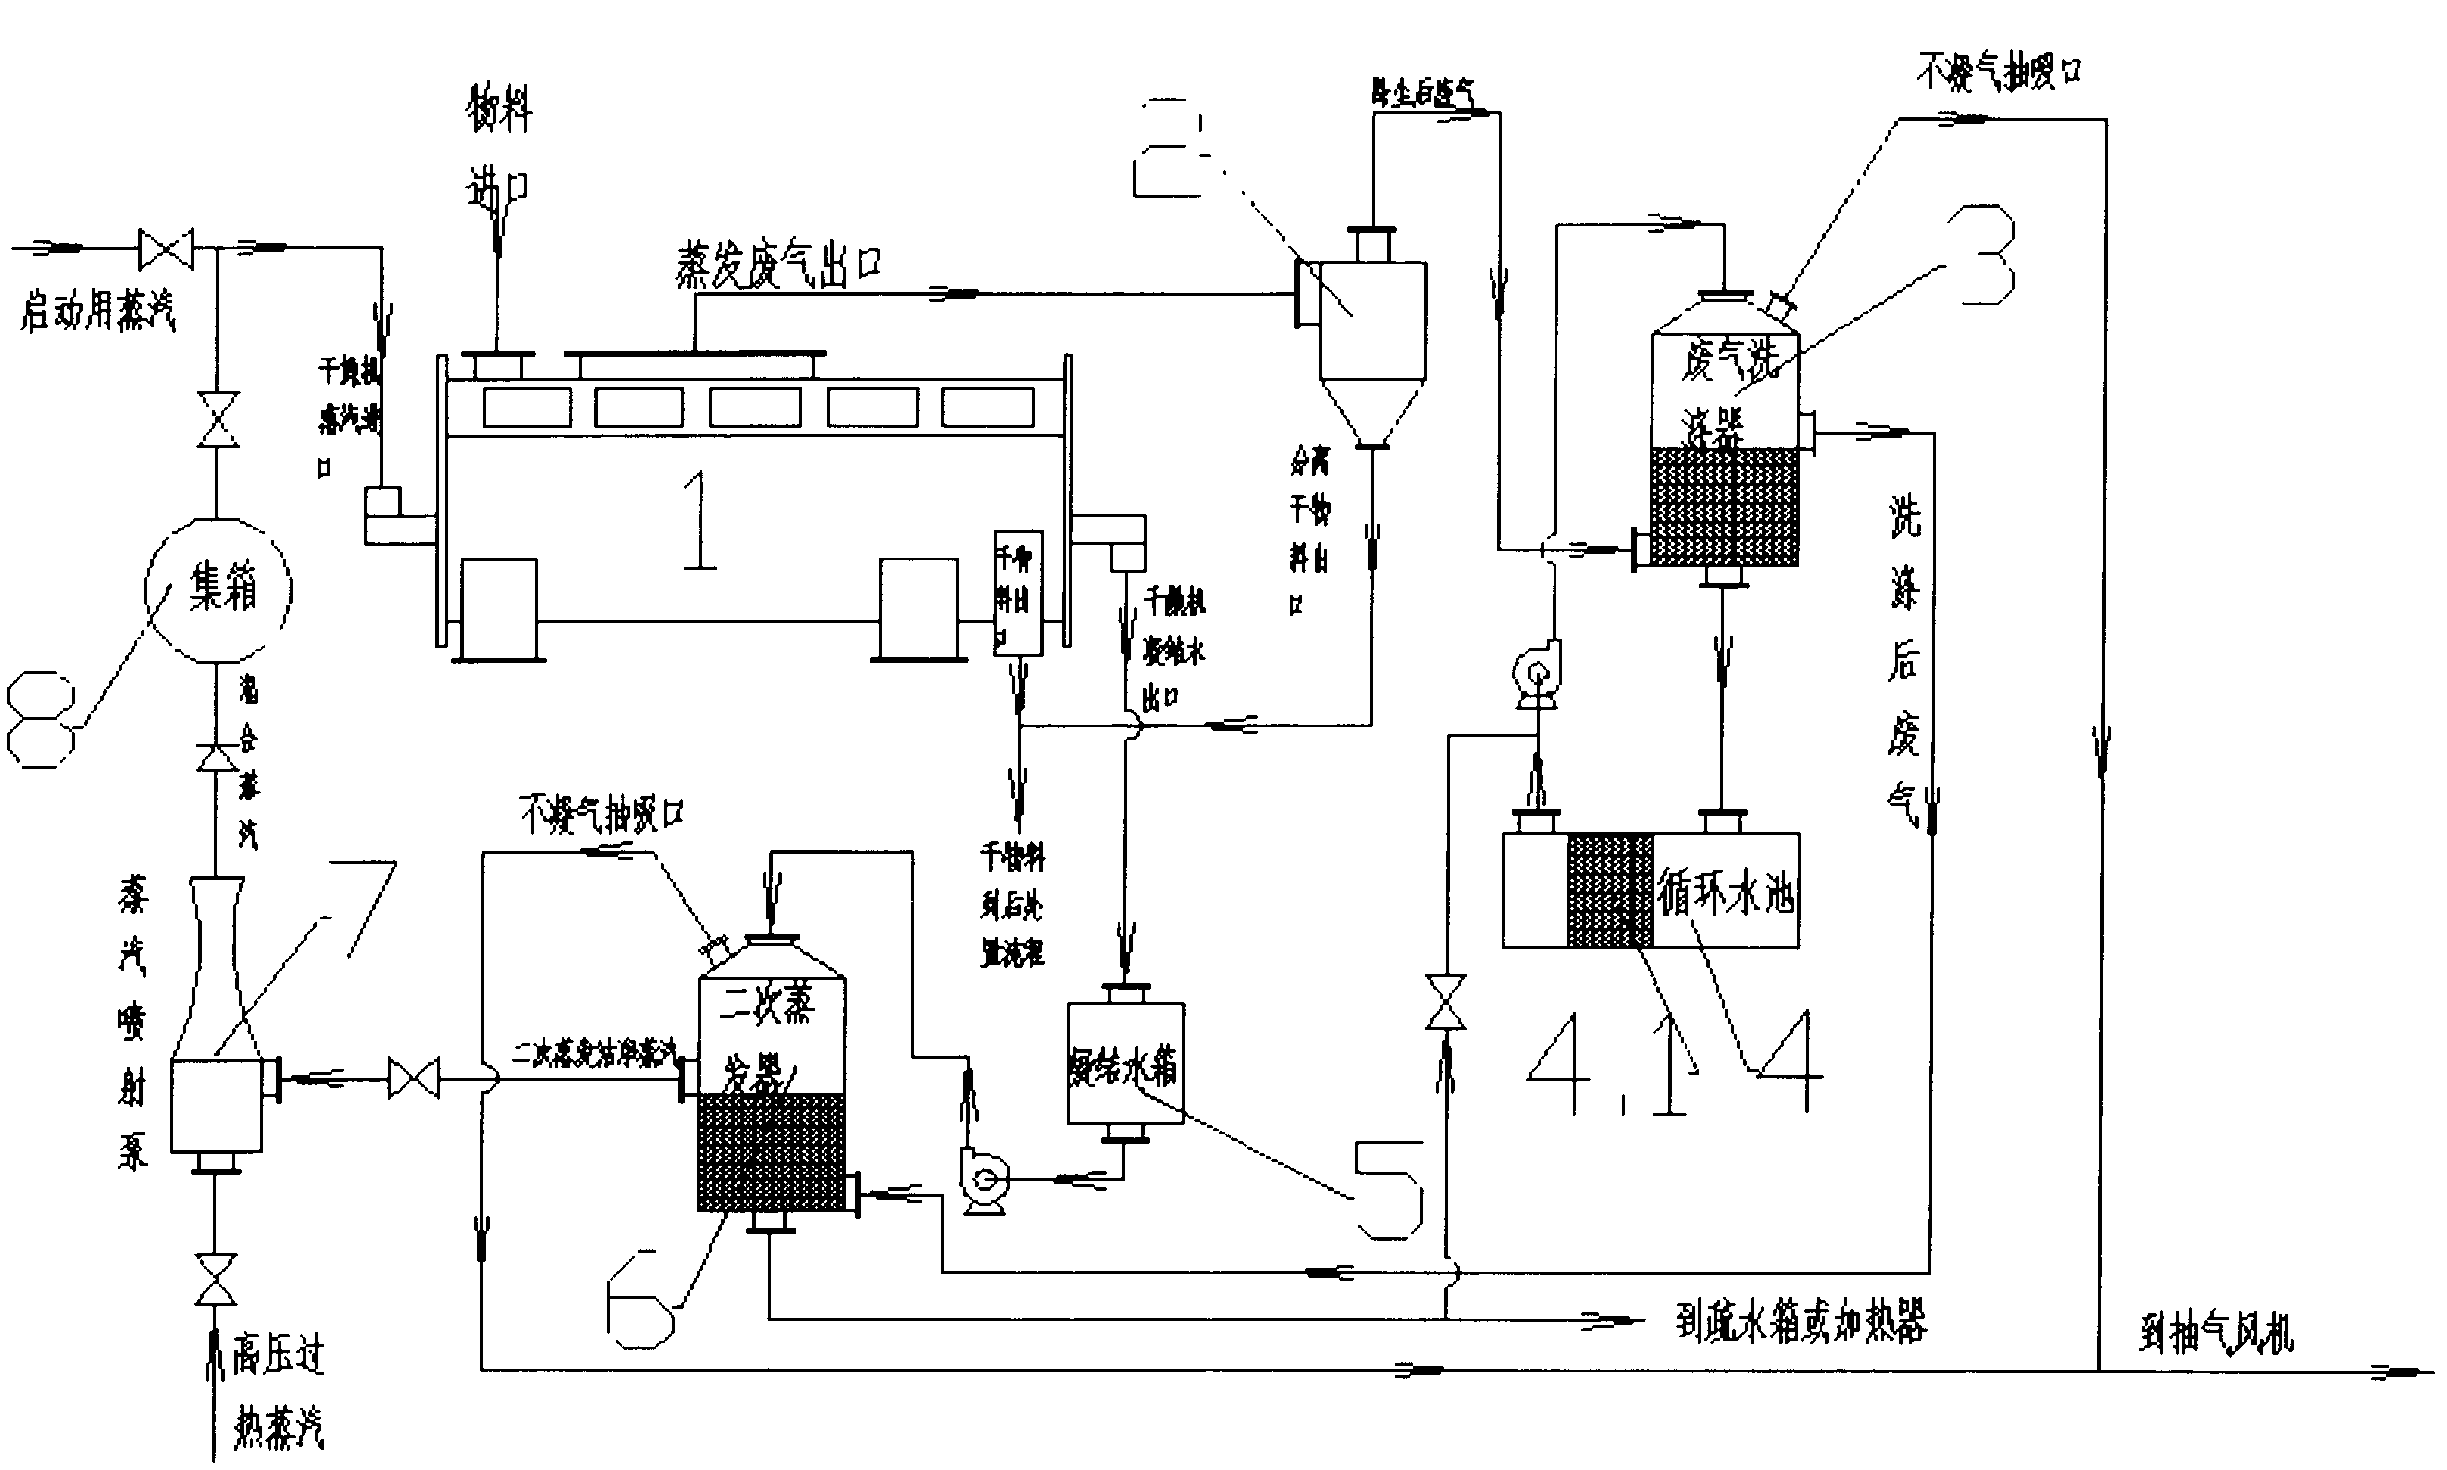 Method for waste steam recycling system